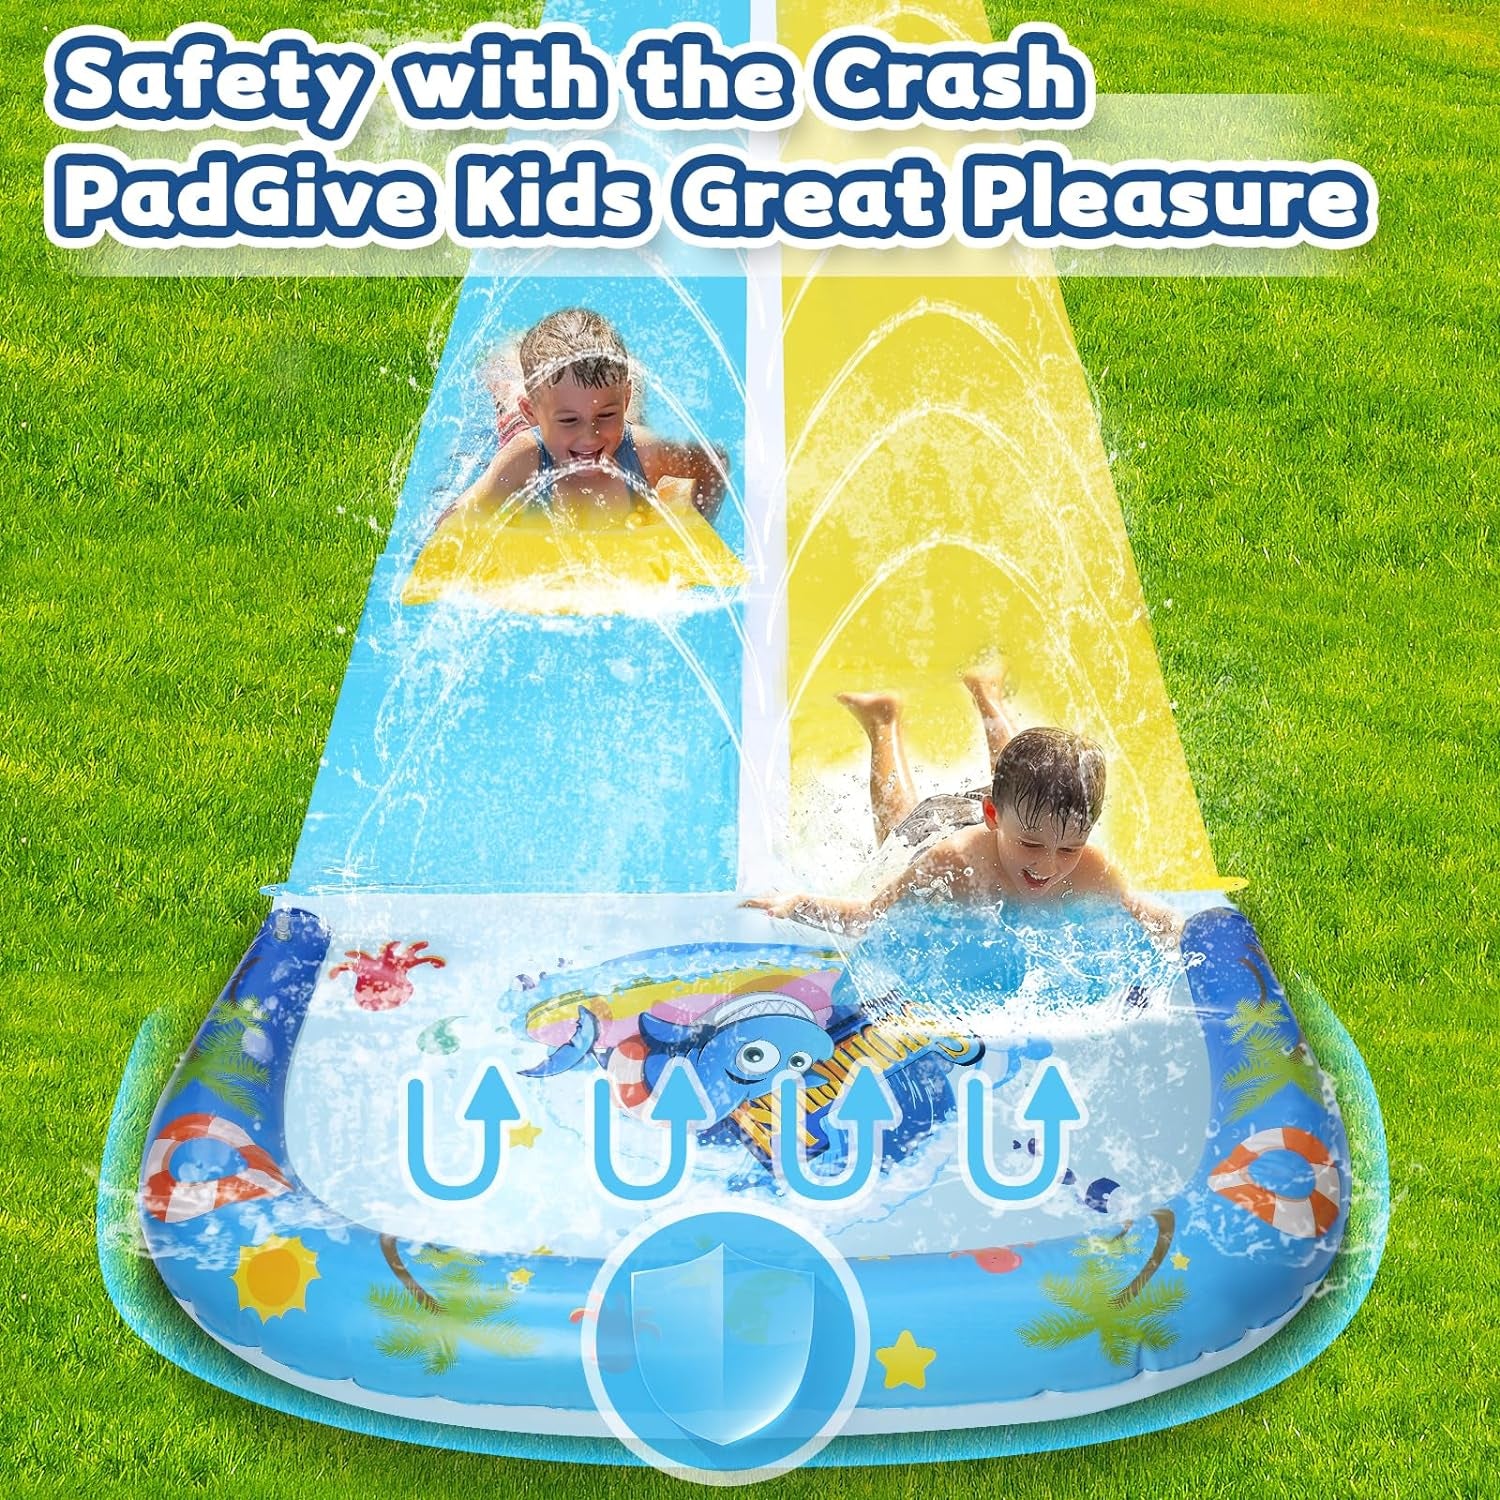 30FT Slip Double Water Slide with 2 Bodyboards, Extra Long Lawn Water Slide Heavy Duty, Giant Outdoor Water Slip Toys with Crash Pad for Backyard Summer Party